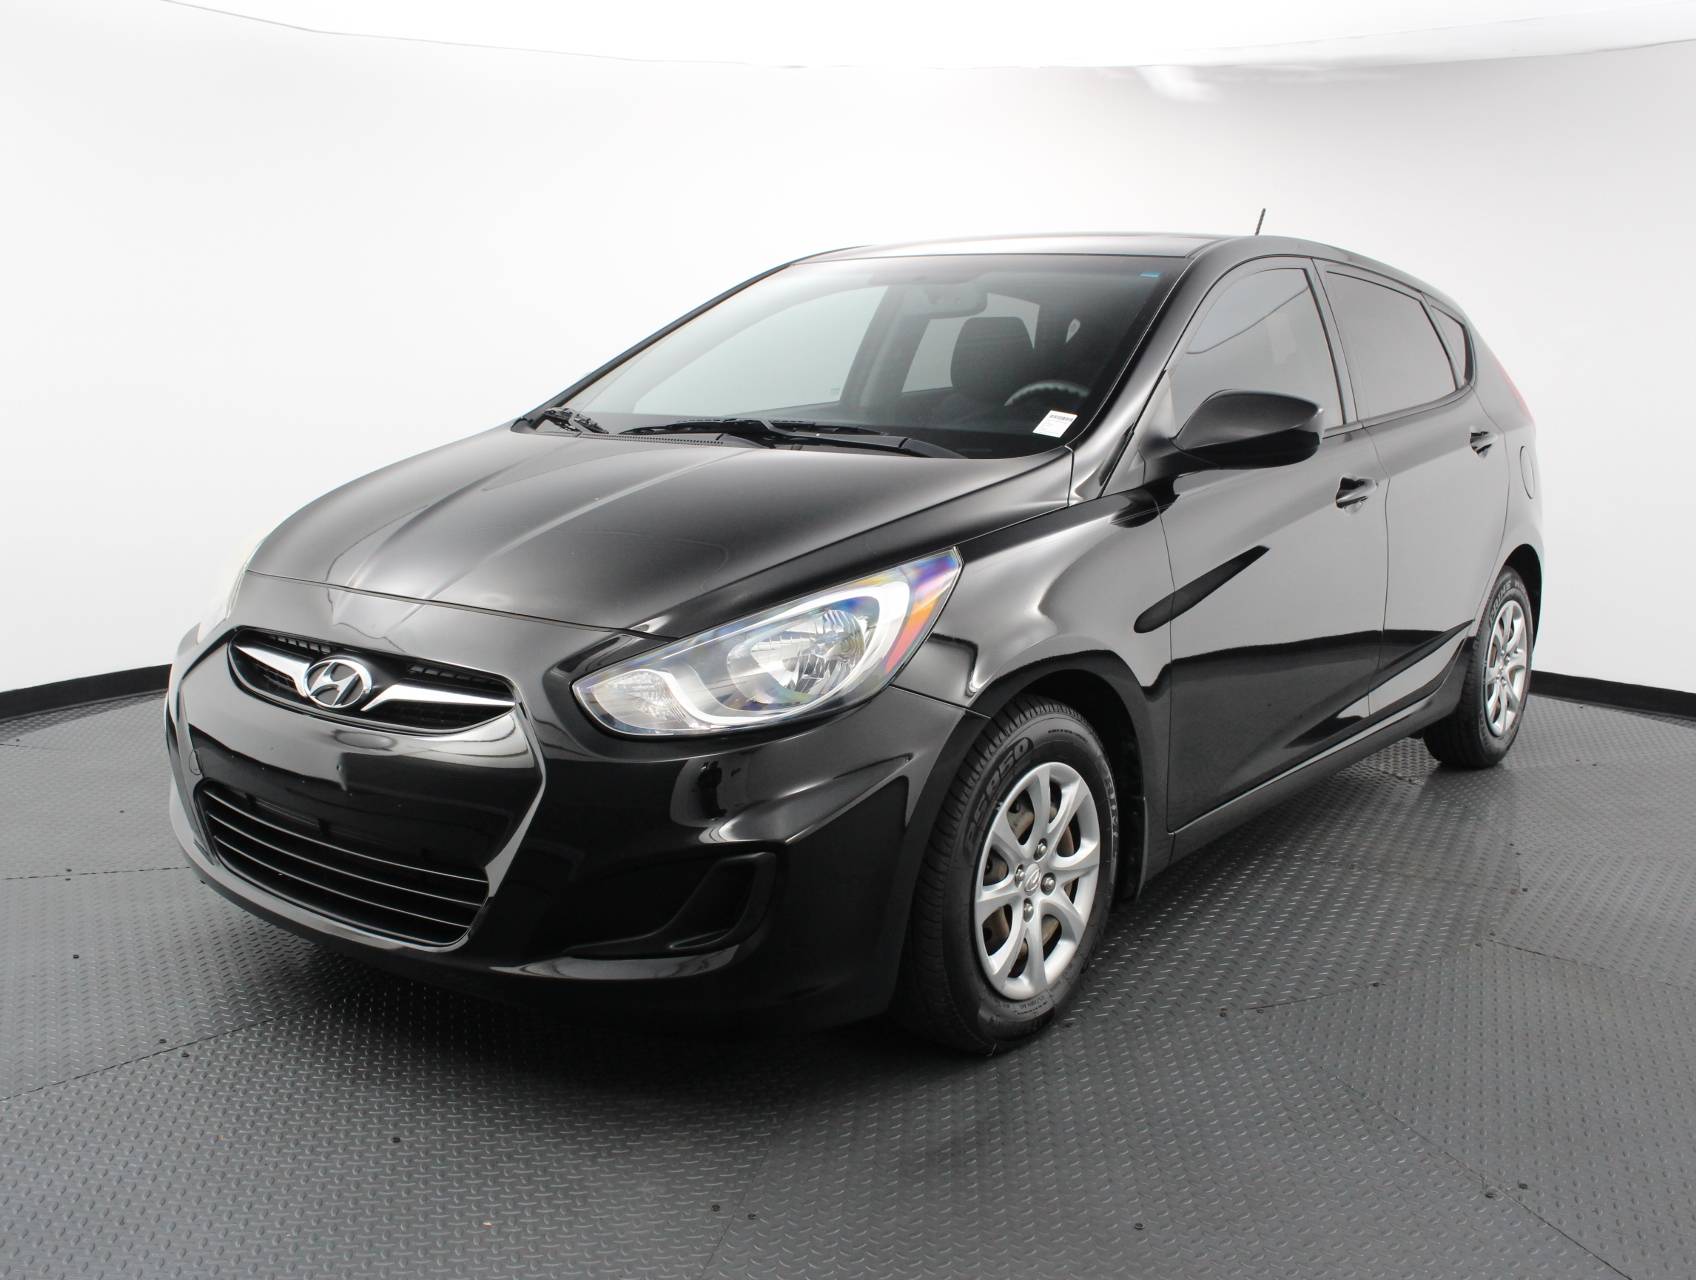 Used 2013 HYUNDAI ACCENT GS for sale in WEST PALM | 119929